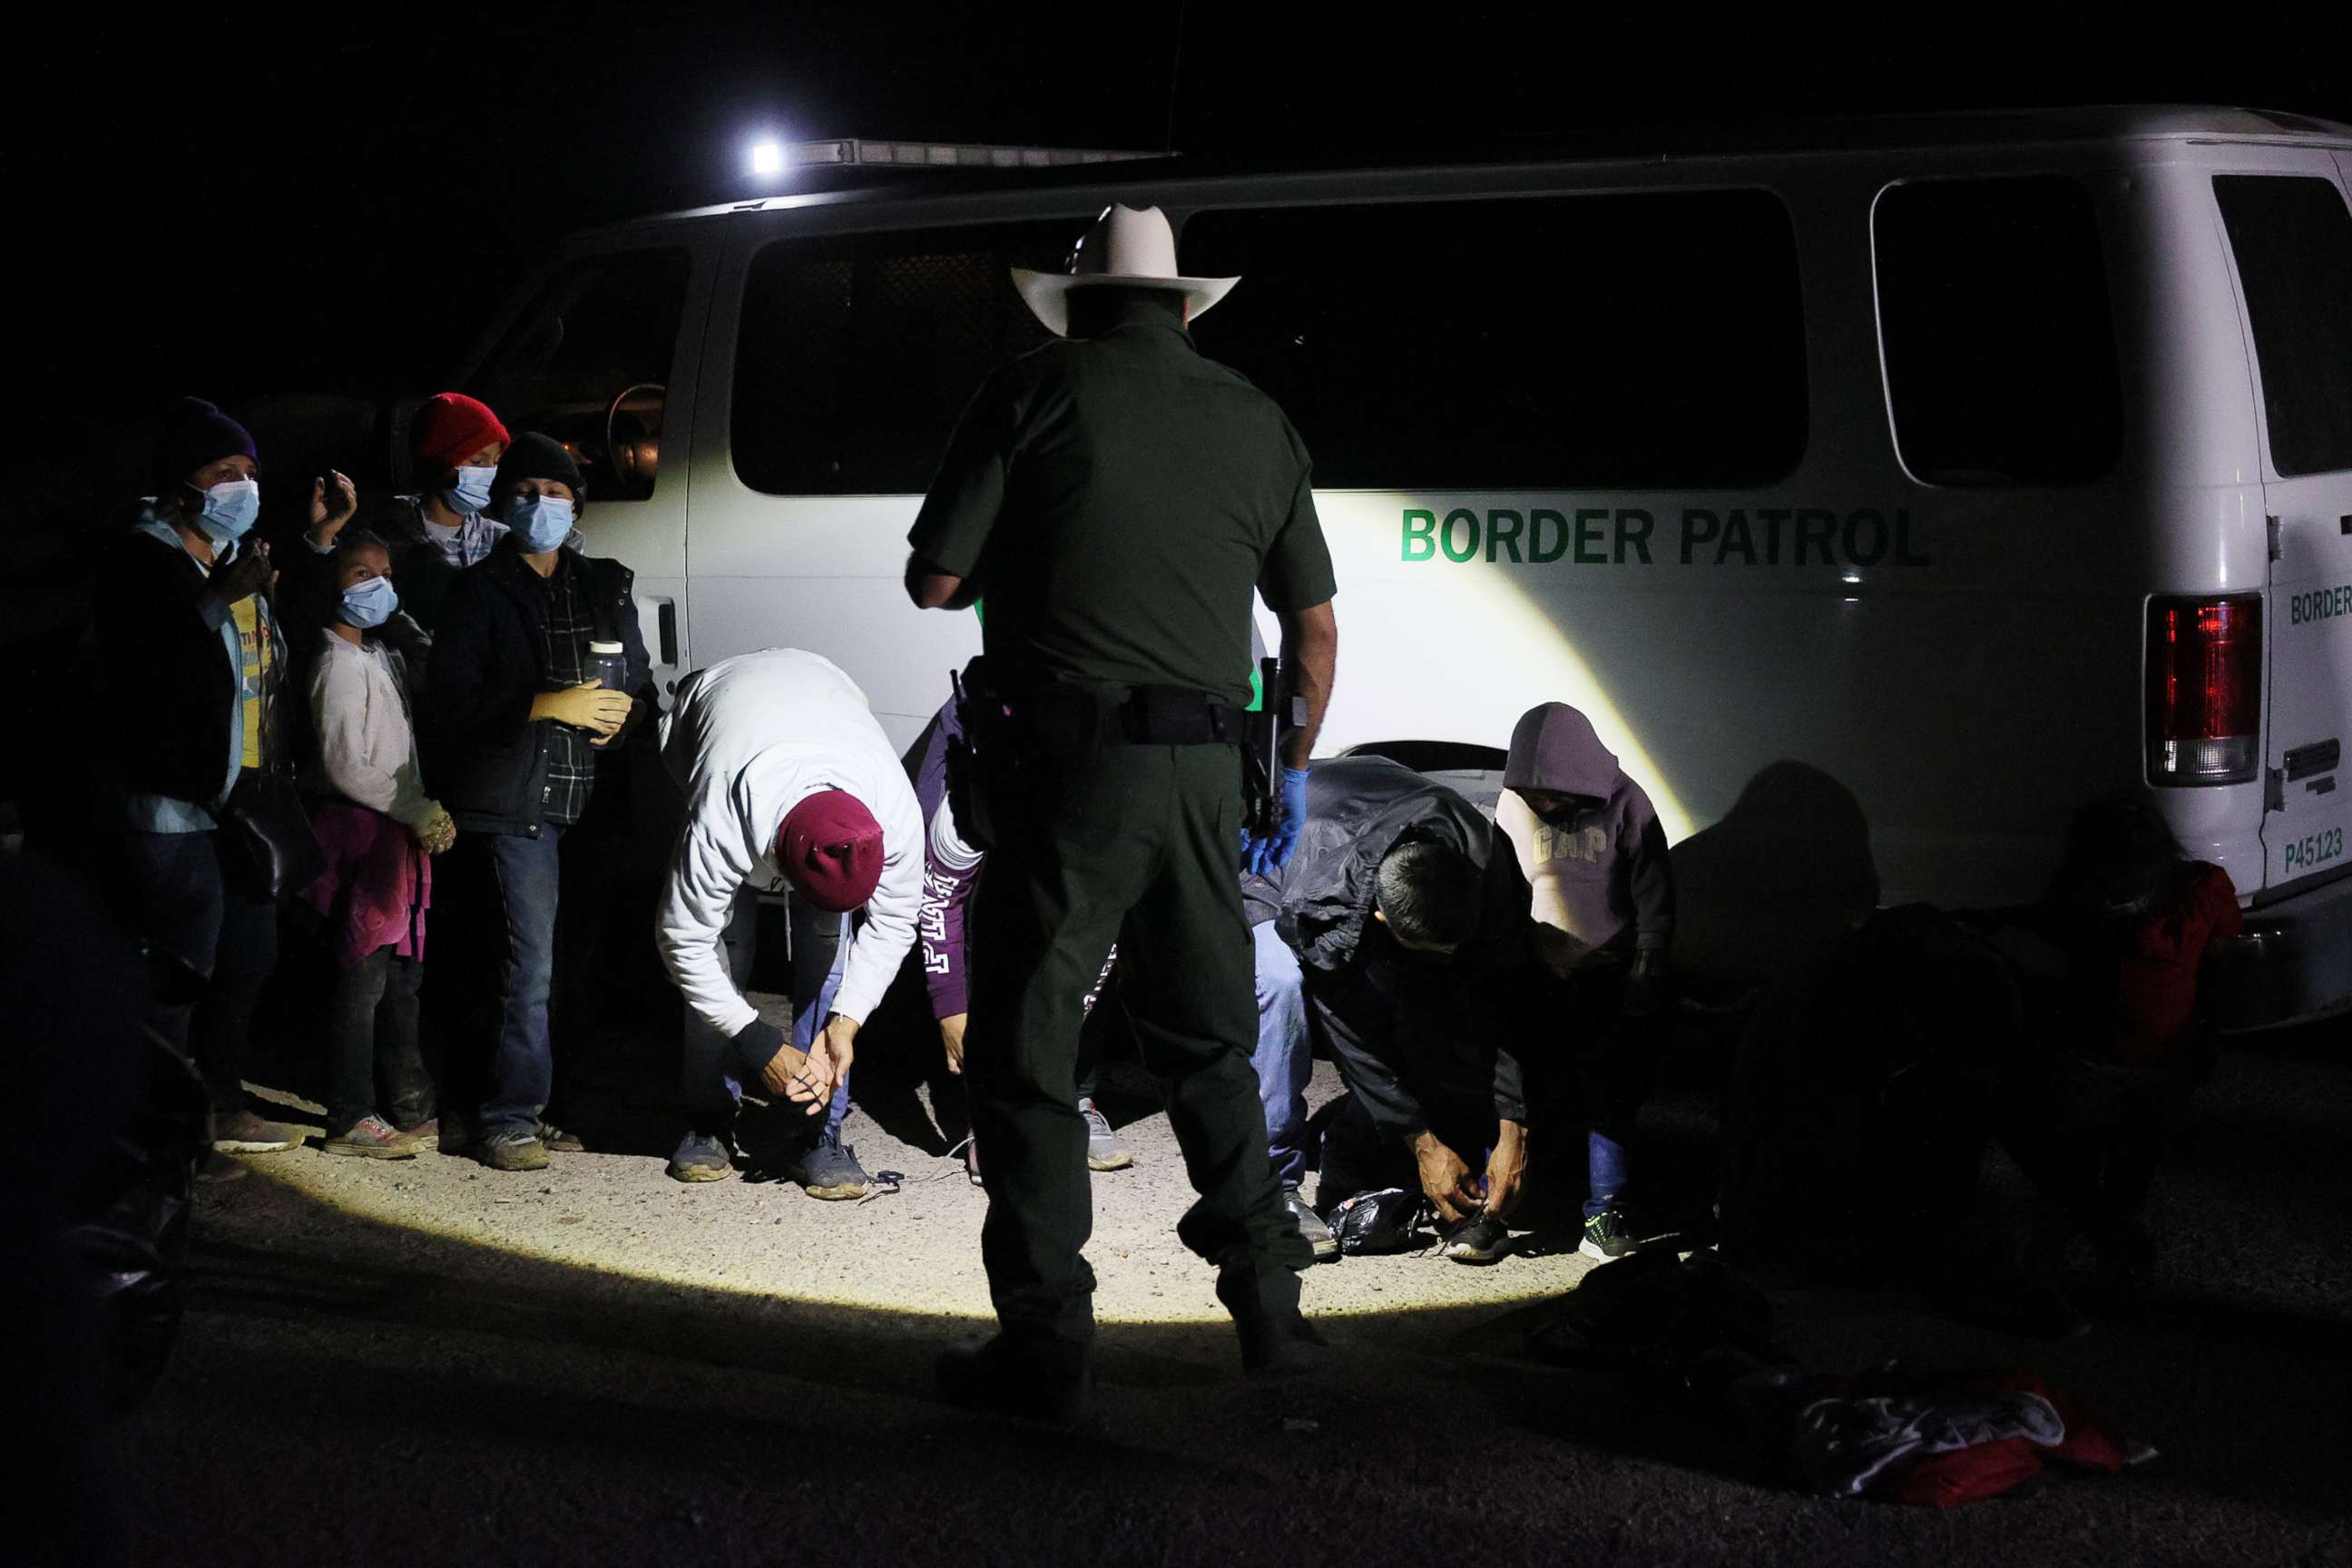 PHOTO: A group of migrants is processed by U.S. Border Patrol agents after arriving from Mexico on March 30, 2021 in Roma, Texas.